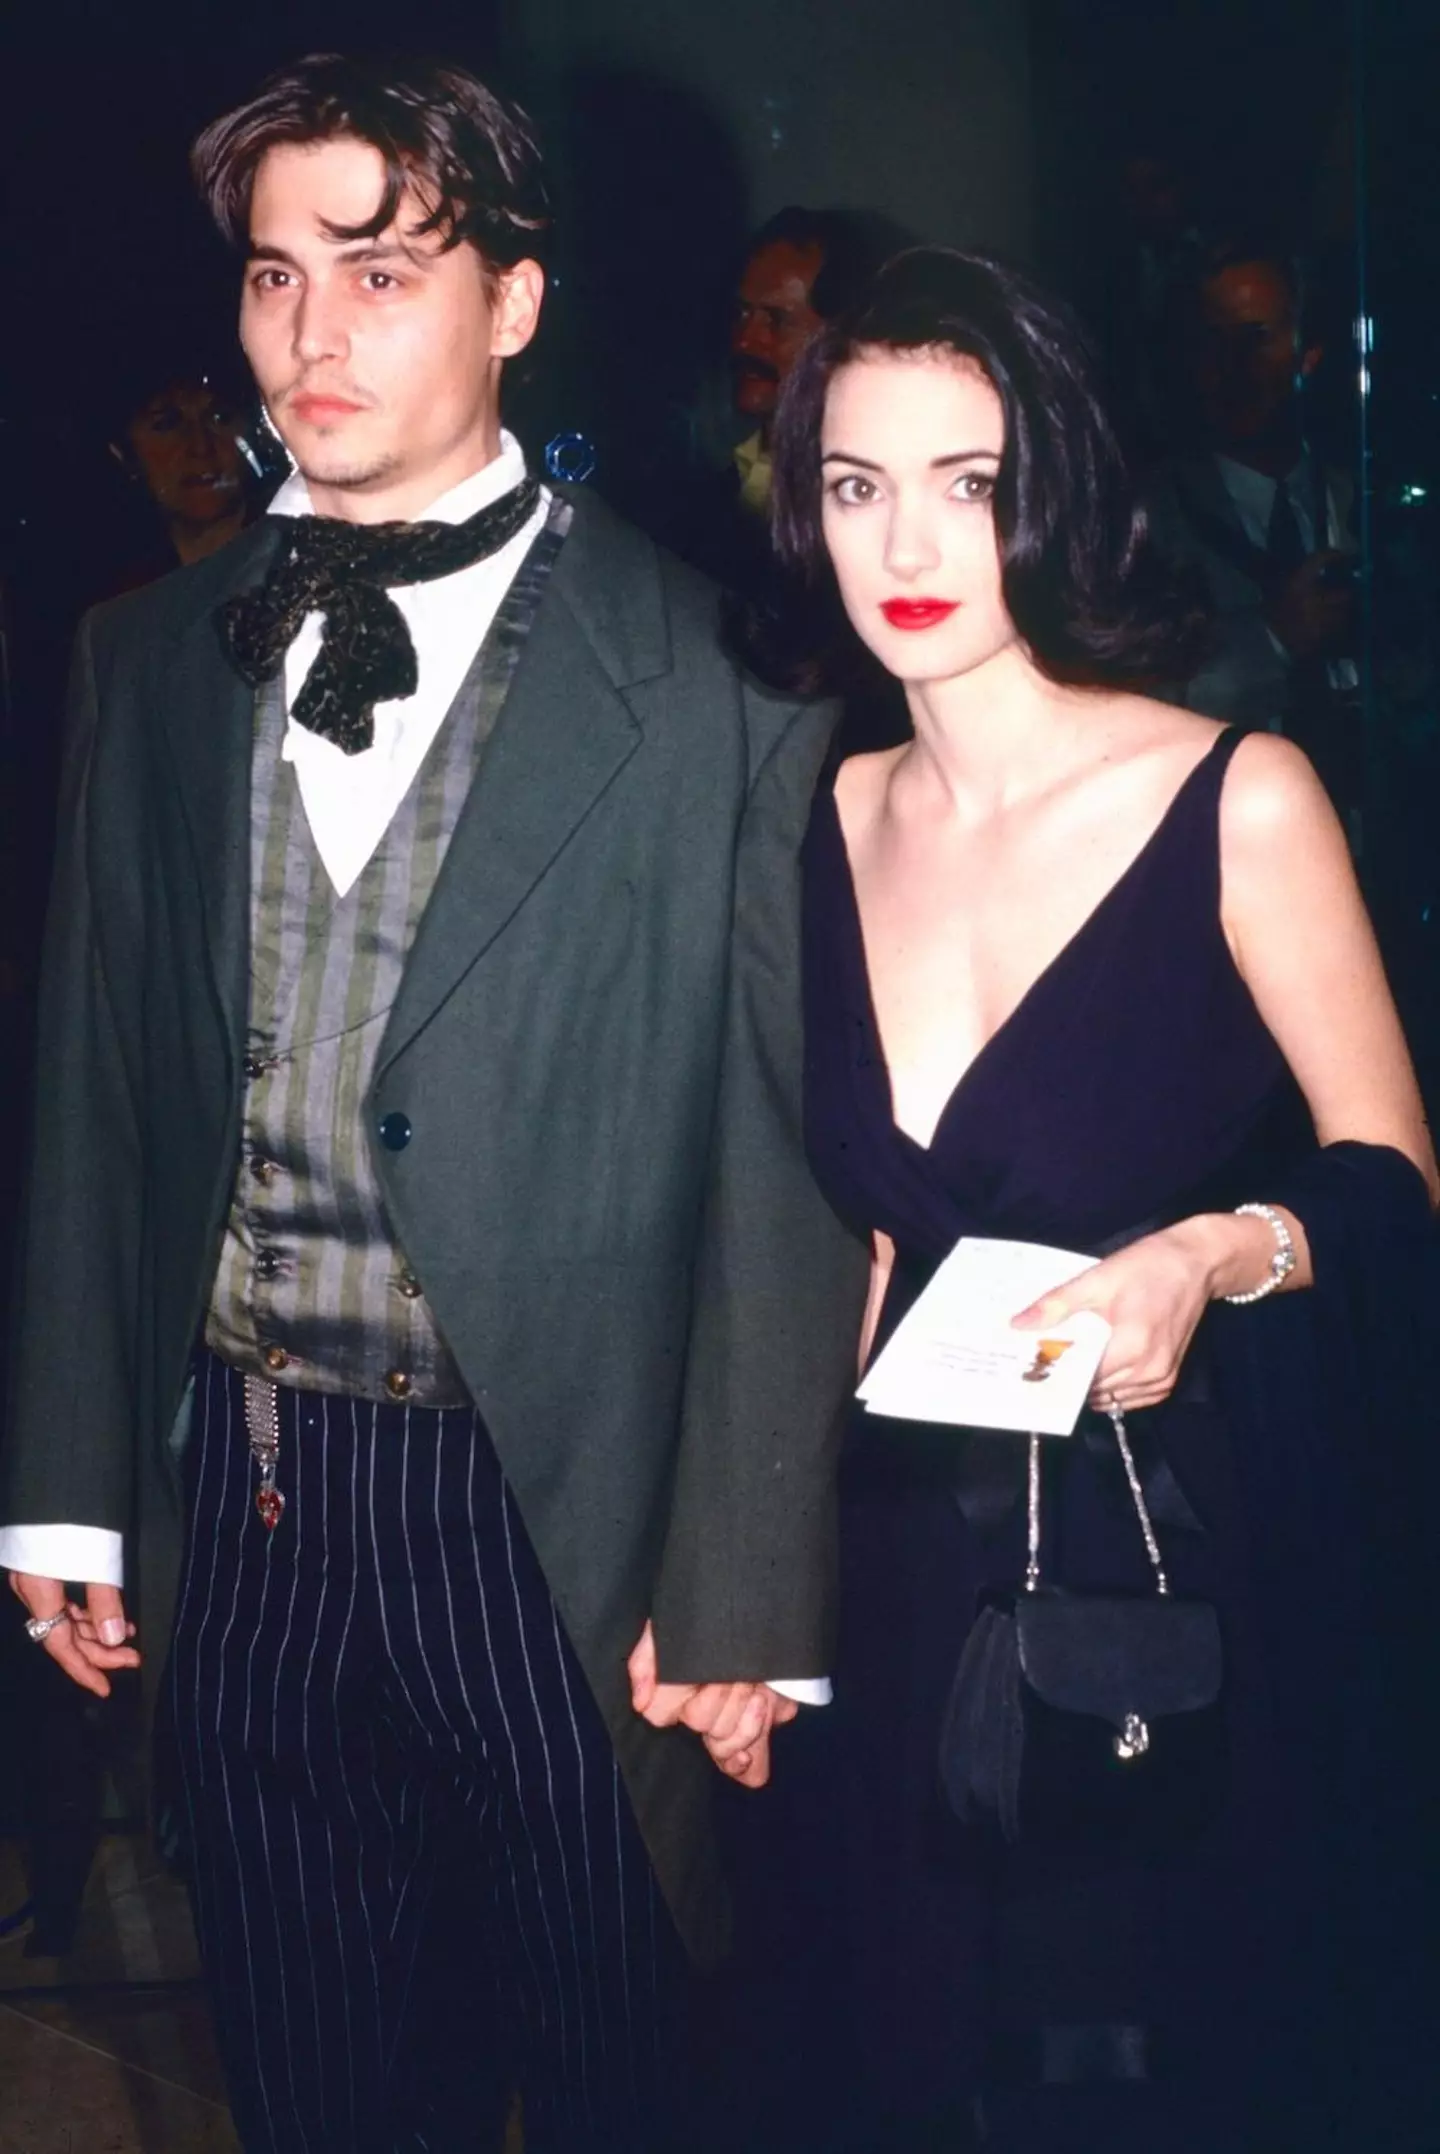 The Beetlejuice star also dated Johnny Depp in the 90s.